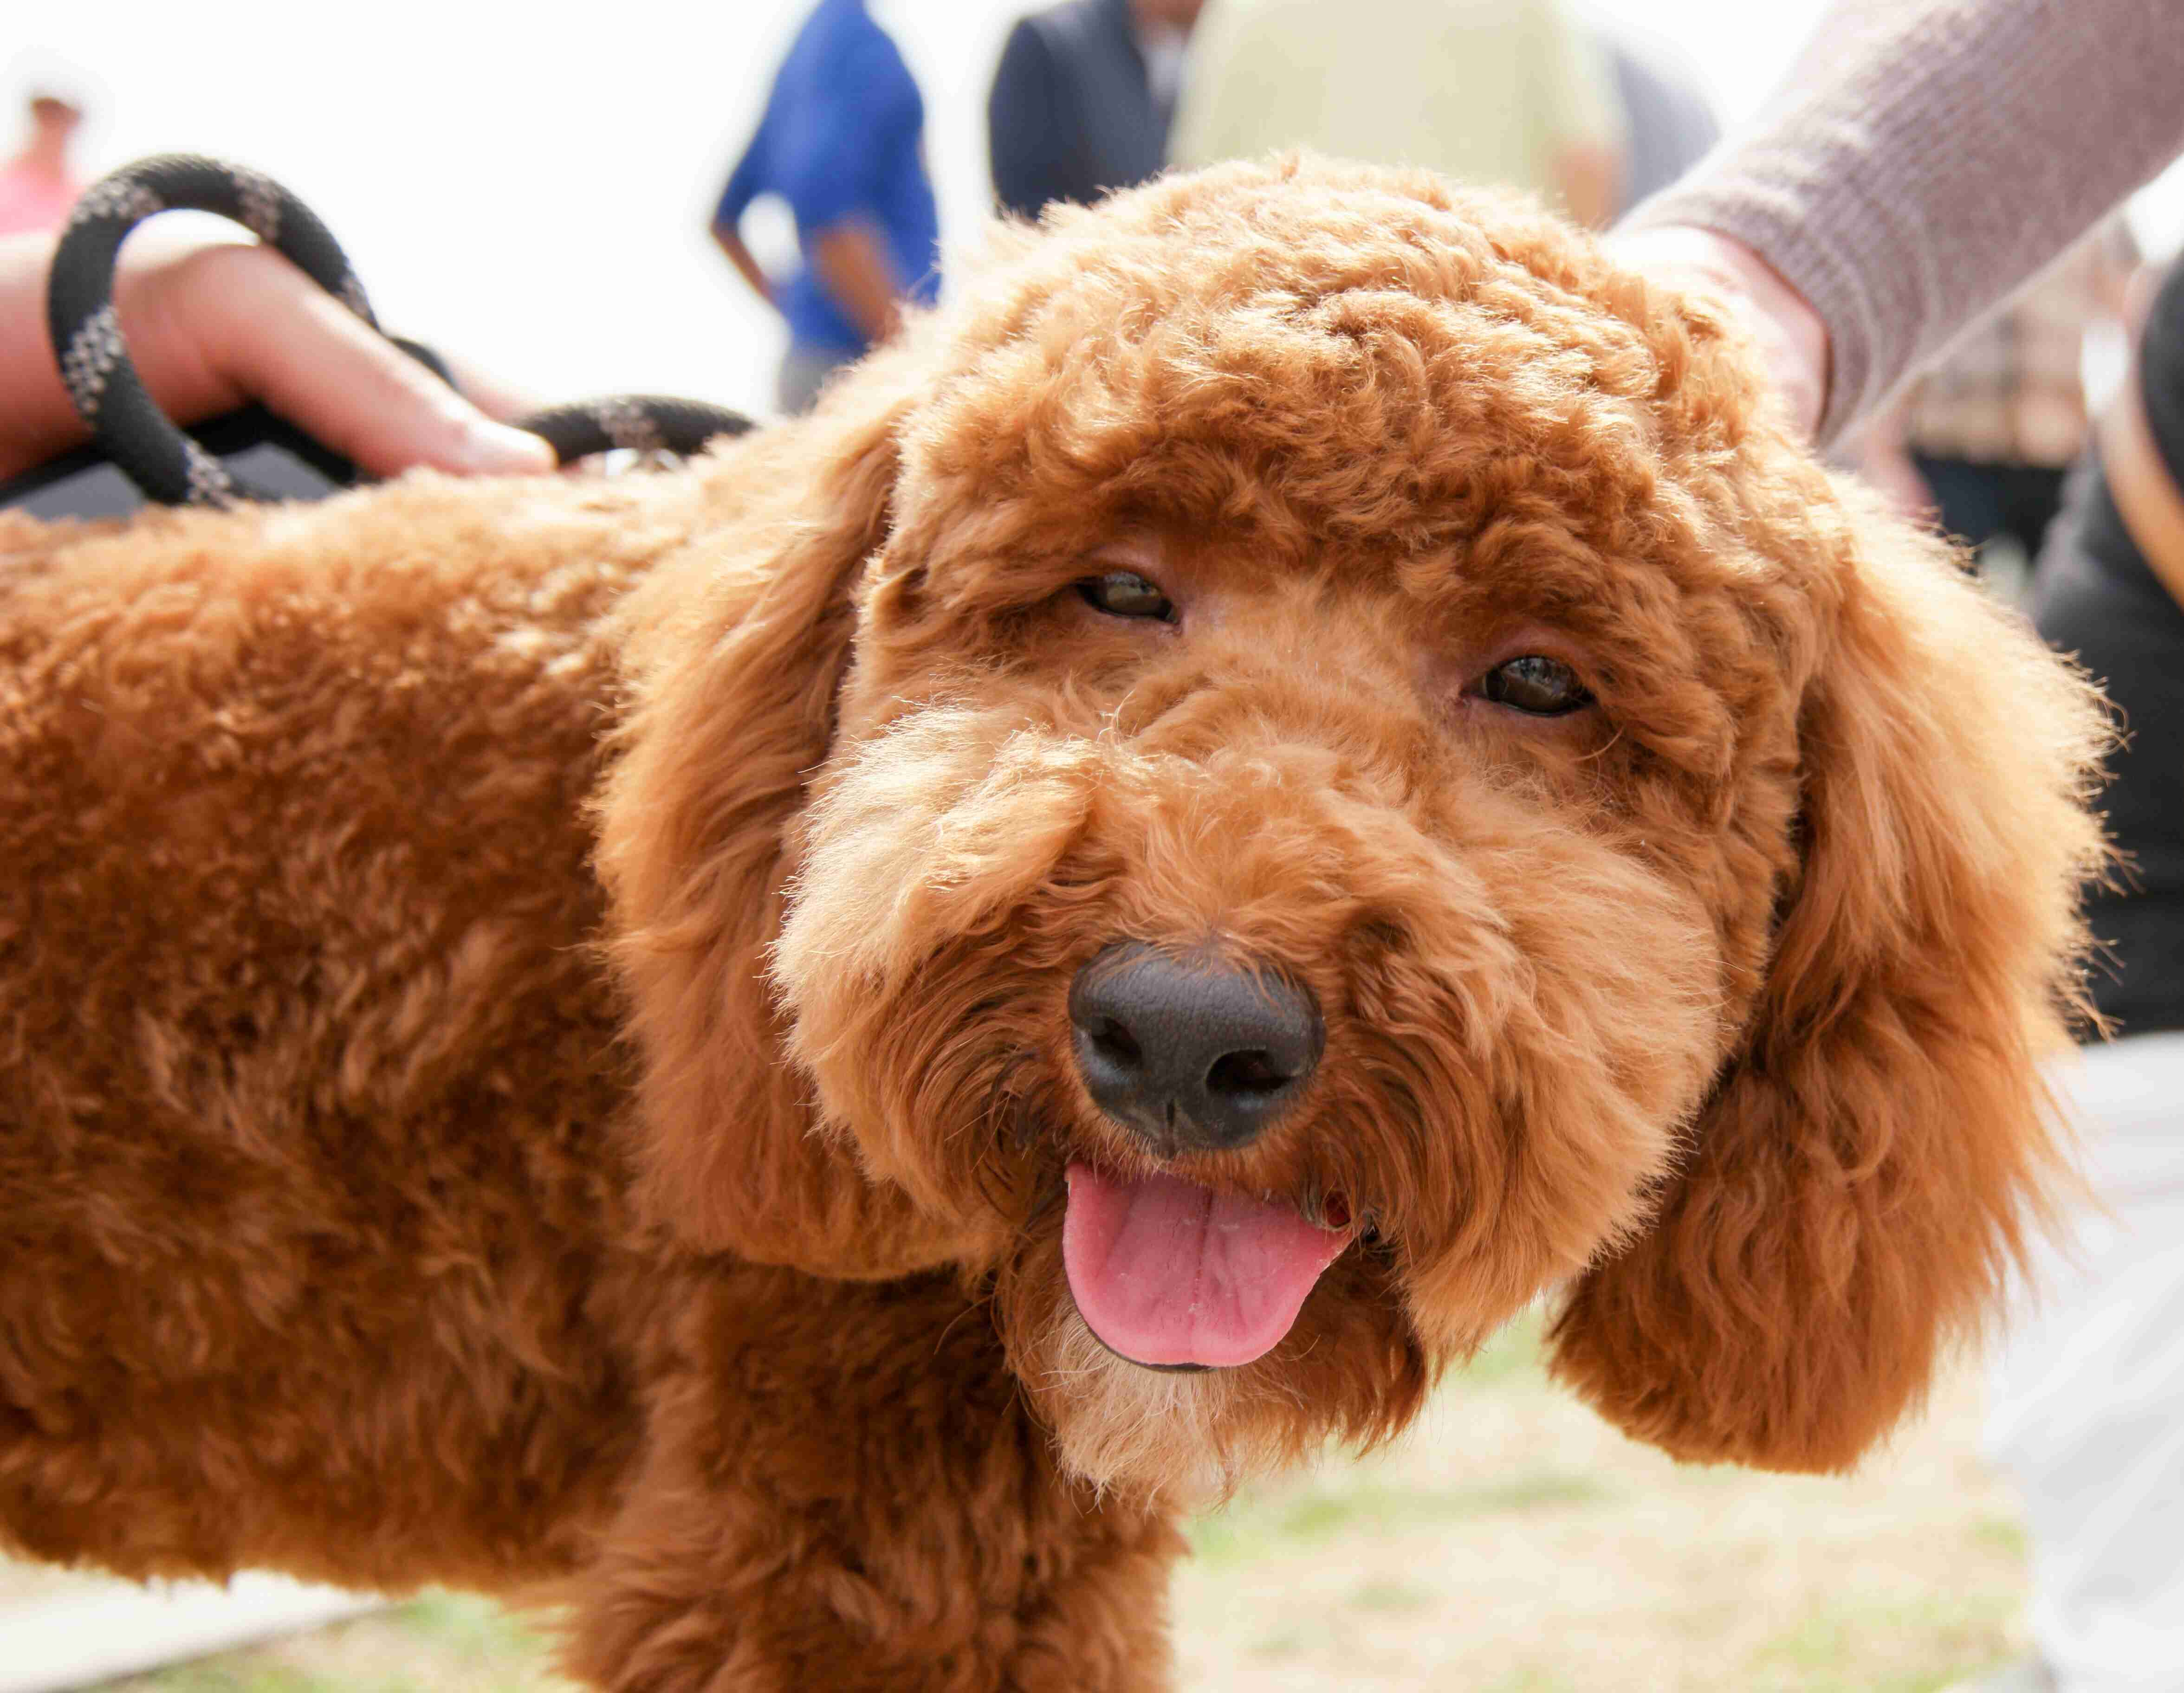 Can Poodles develop certain types of spinal disorders? How can these conditions be managed or treated?